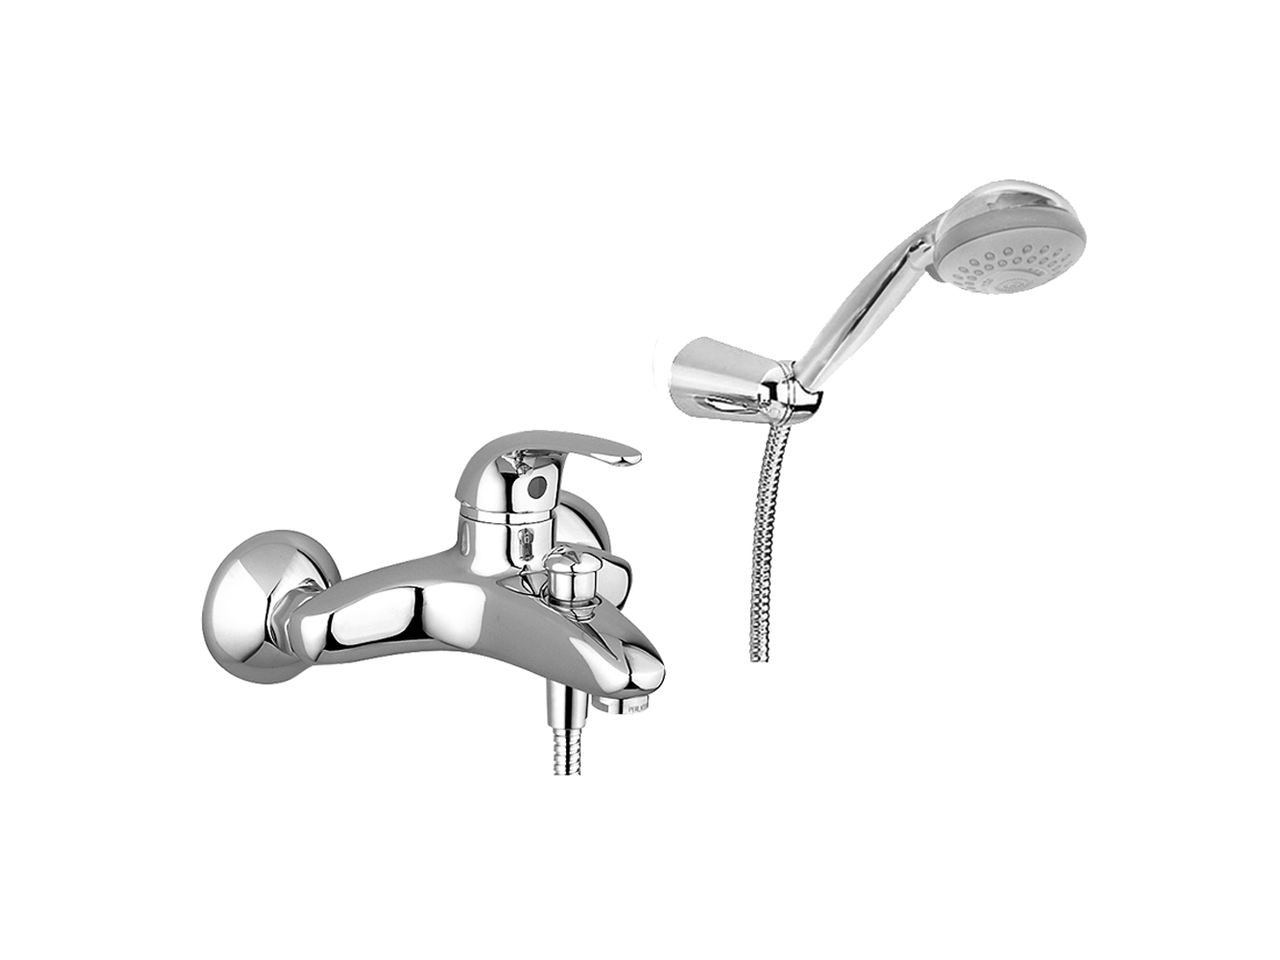 HUBERSingle lever bath mixer, with shower set NORMA